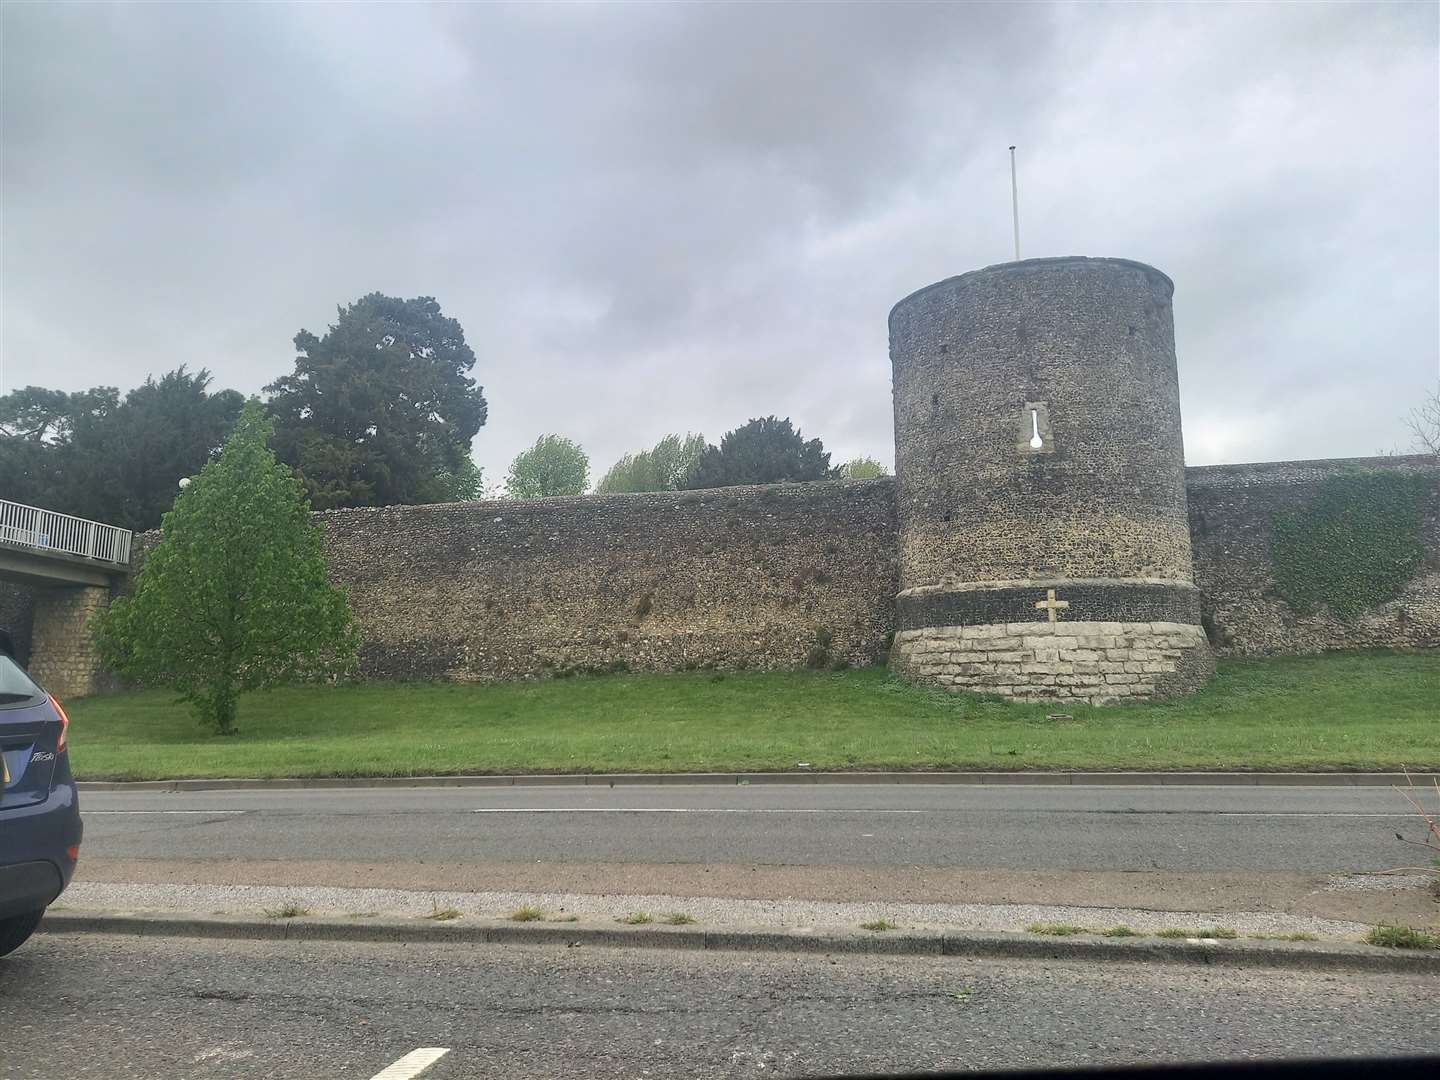 The city wall is set for a big makeover